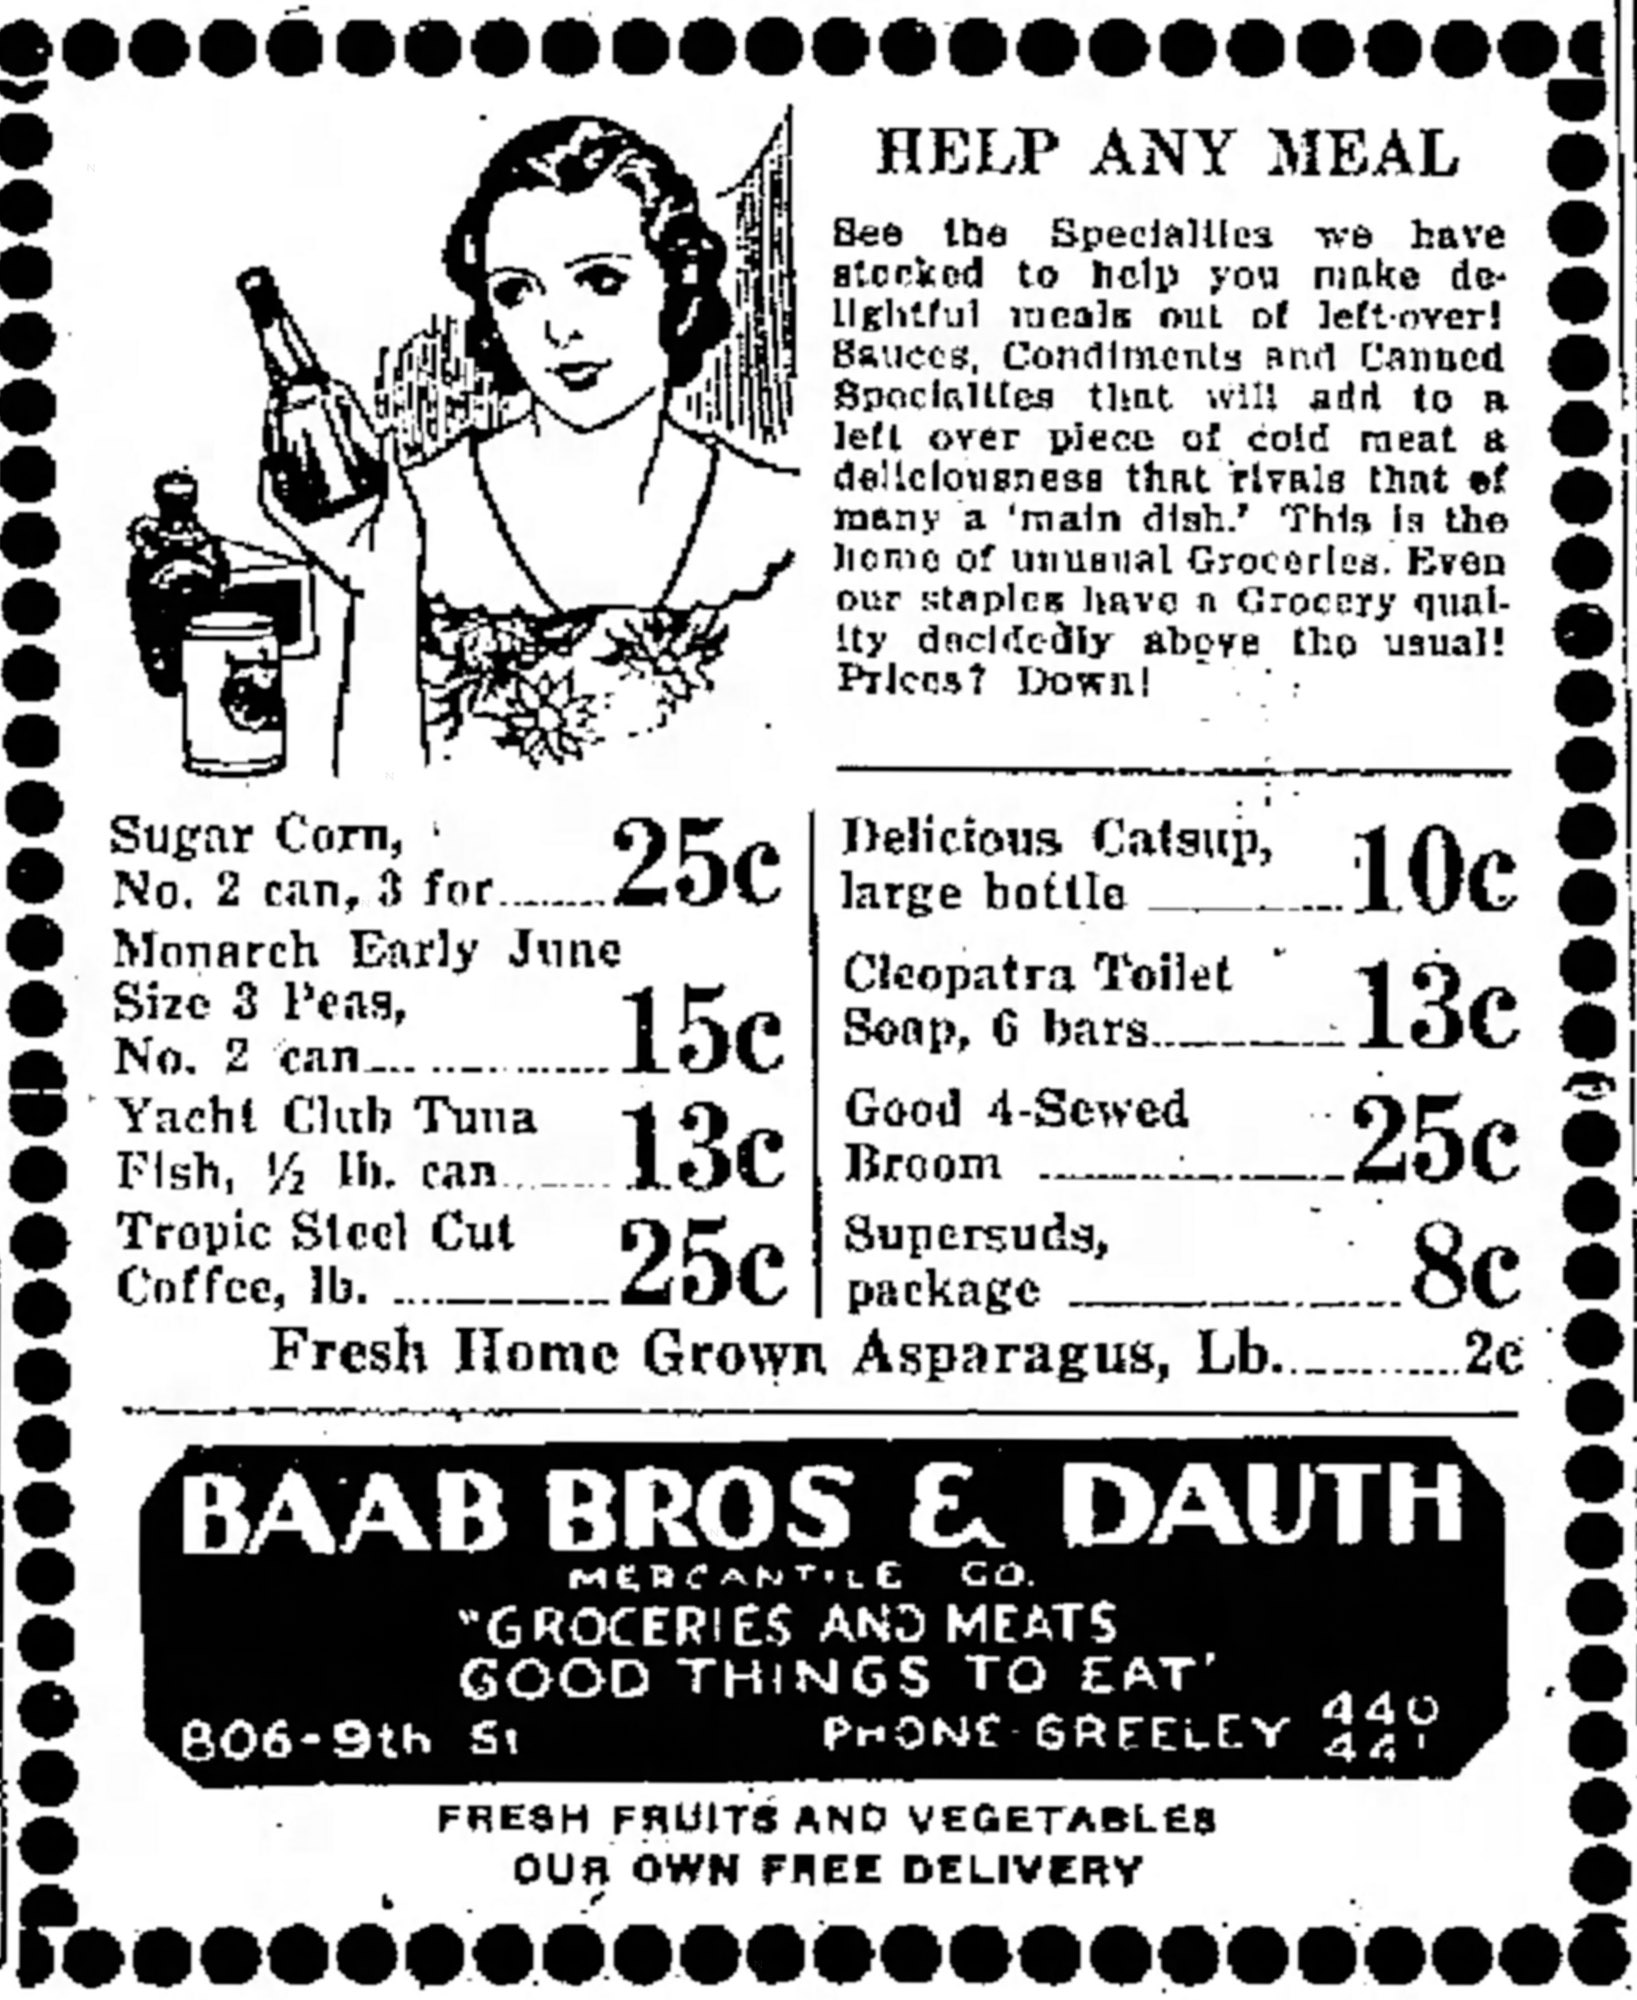 Dauth Family Archive - 1933-05-26 - Greeley Daily Tribune - Baab Bros and Dauth Advertisement